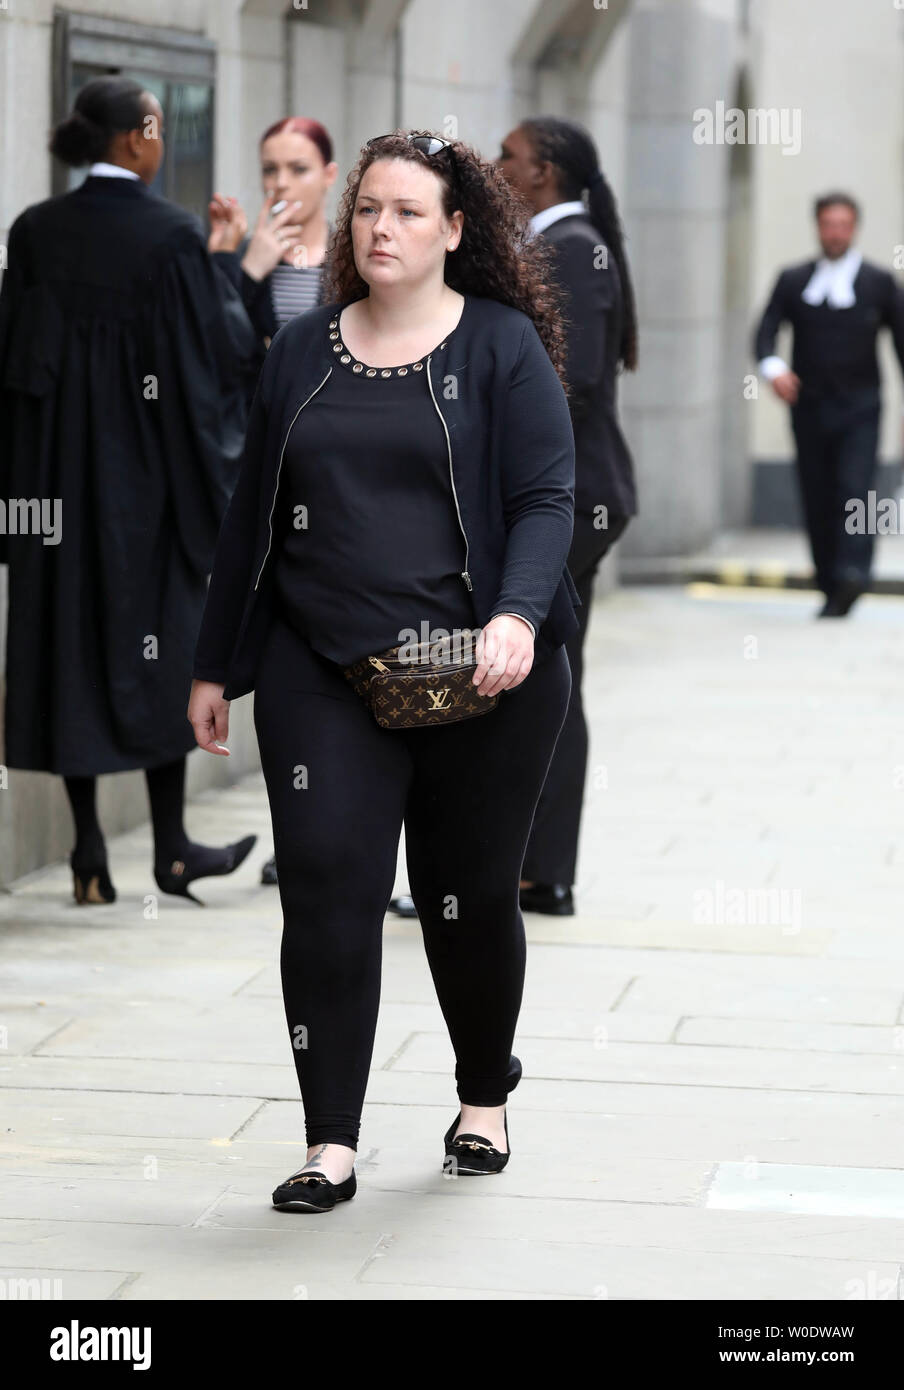 Pic shows: Chelsea Mitchell at the Old Bailey  for her trial in the case of Lee Pomeroy murder.     pic by Gavin Rodgers/Pixel8000 26.6.19 Stock Photo